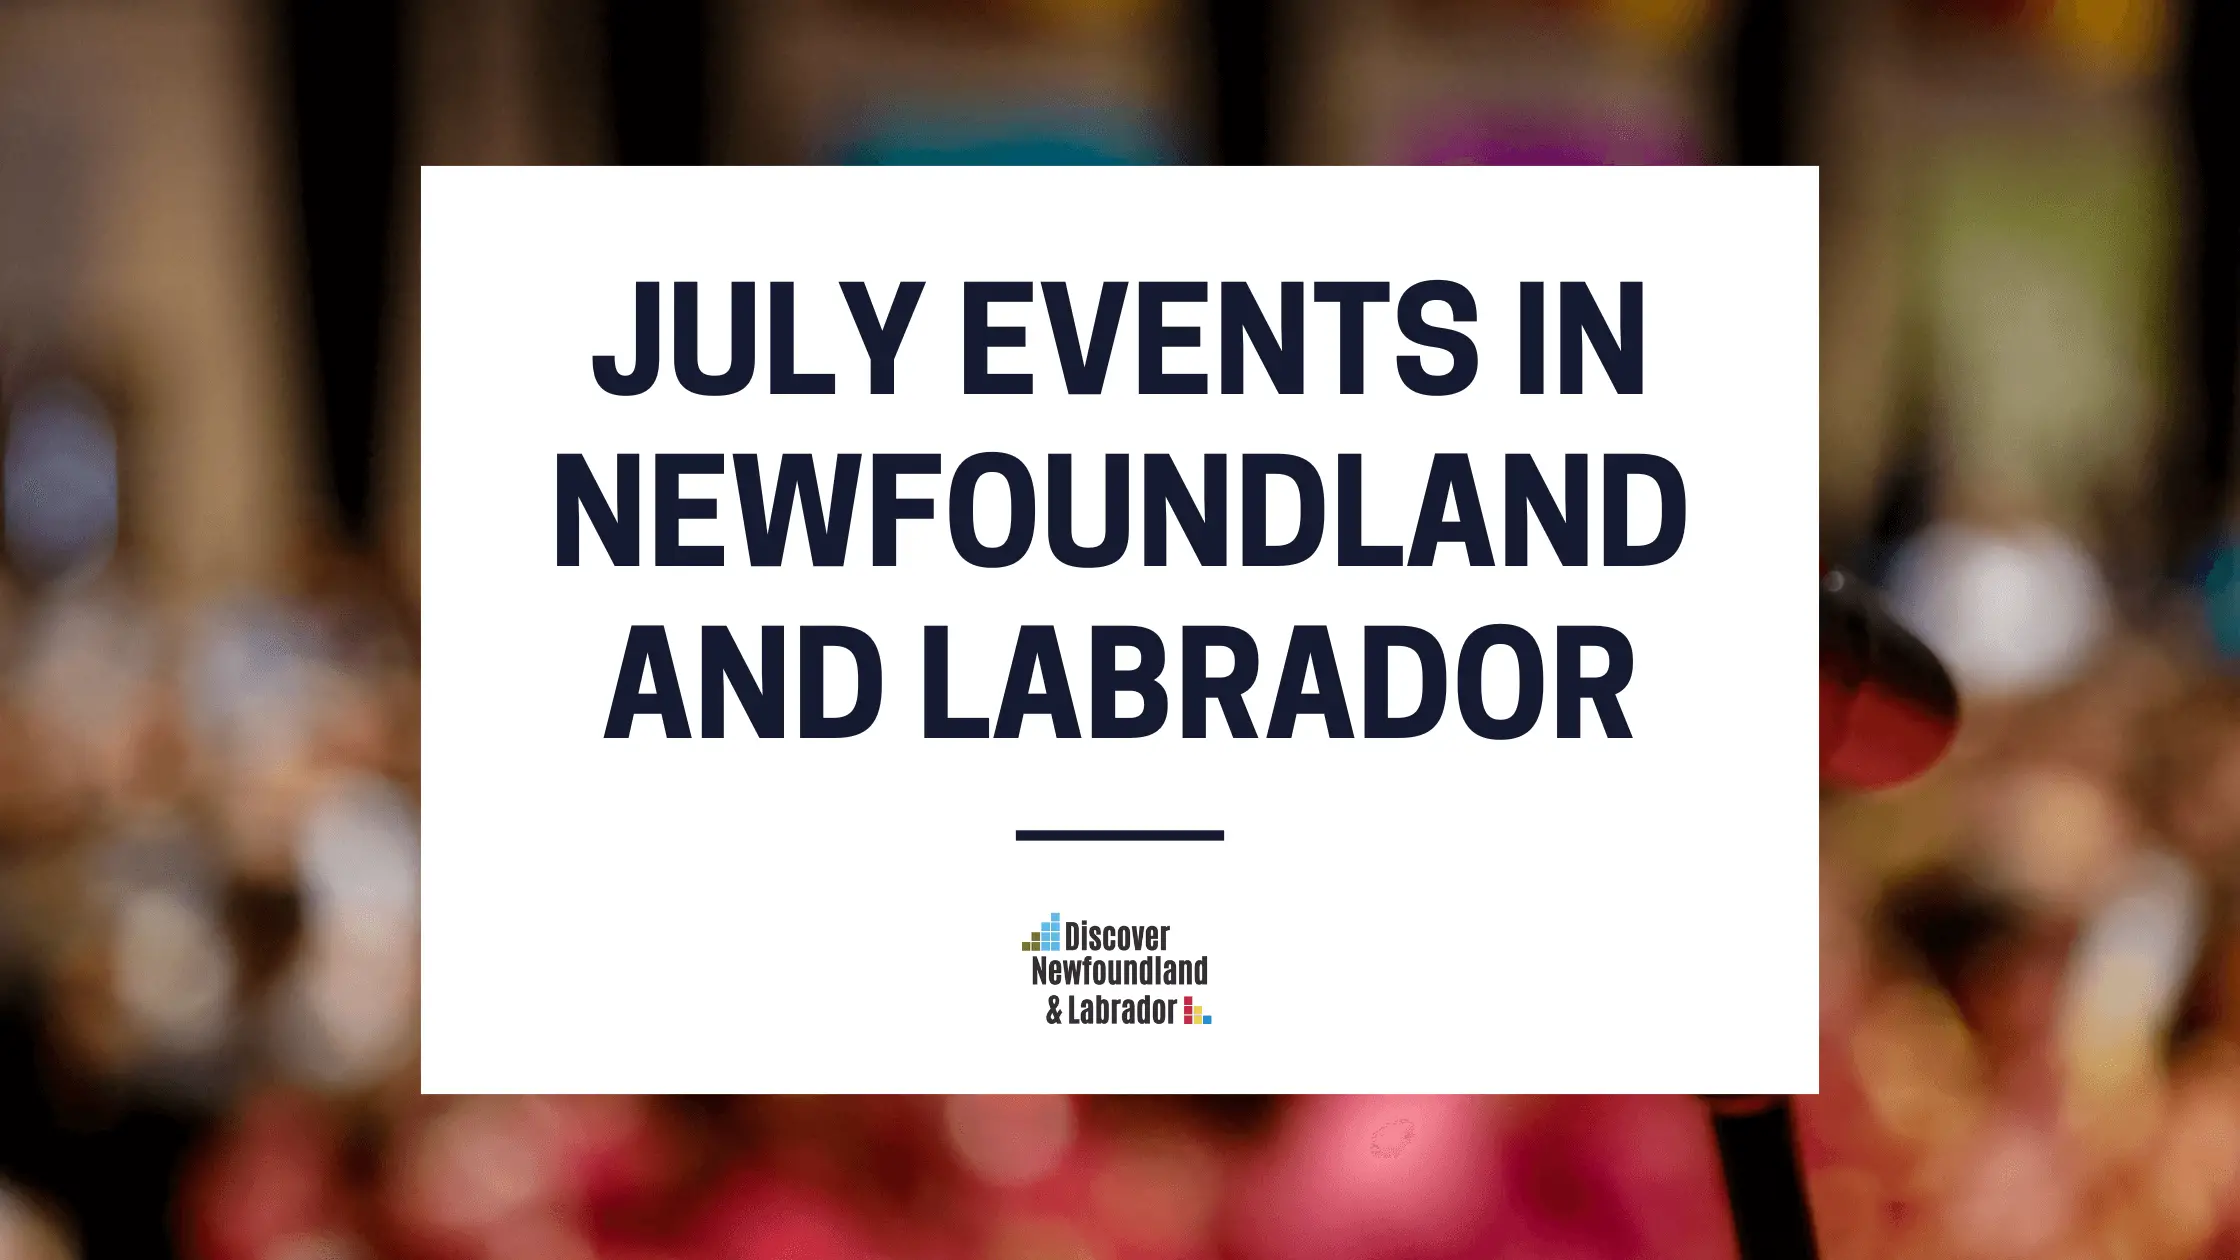 July Events In Newfoundland and Labrador